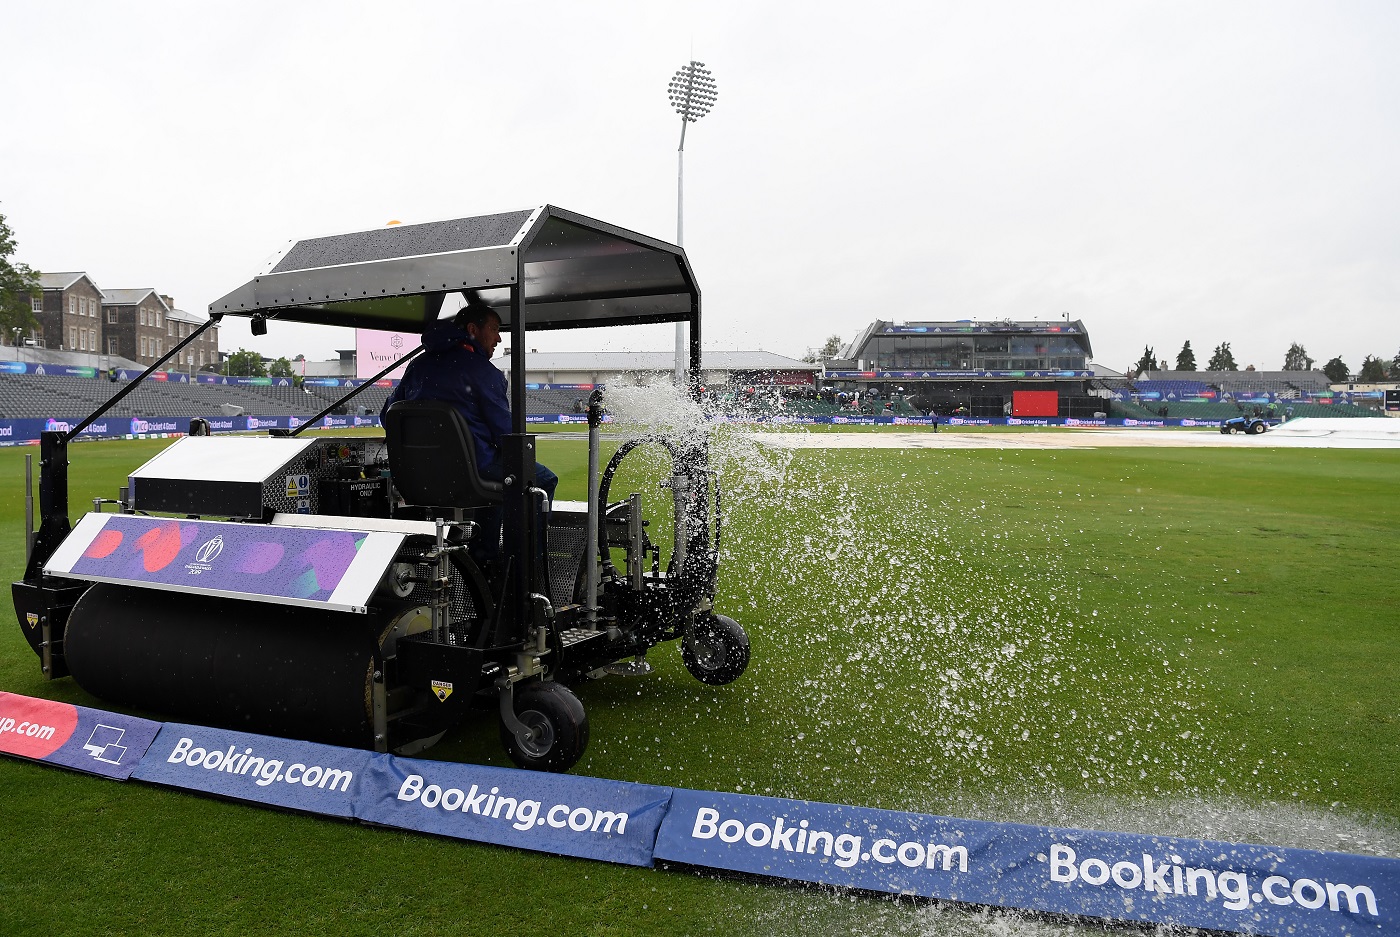 Pakistan Sri Lanka Game Got Washed Out, Pakistan Meets Australia In The World Cup, A List Of Miracles That Pakistan Requires To Make It To The Semi-final Stage